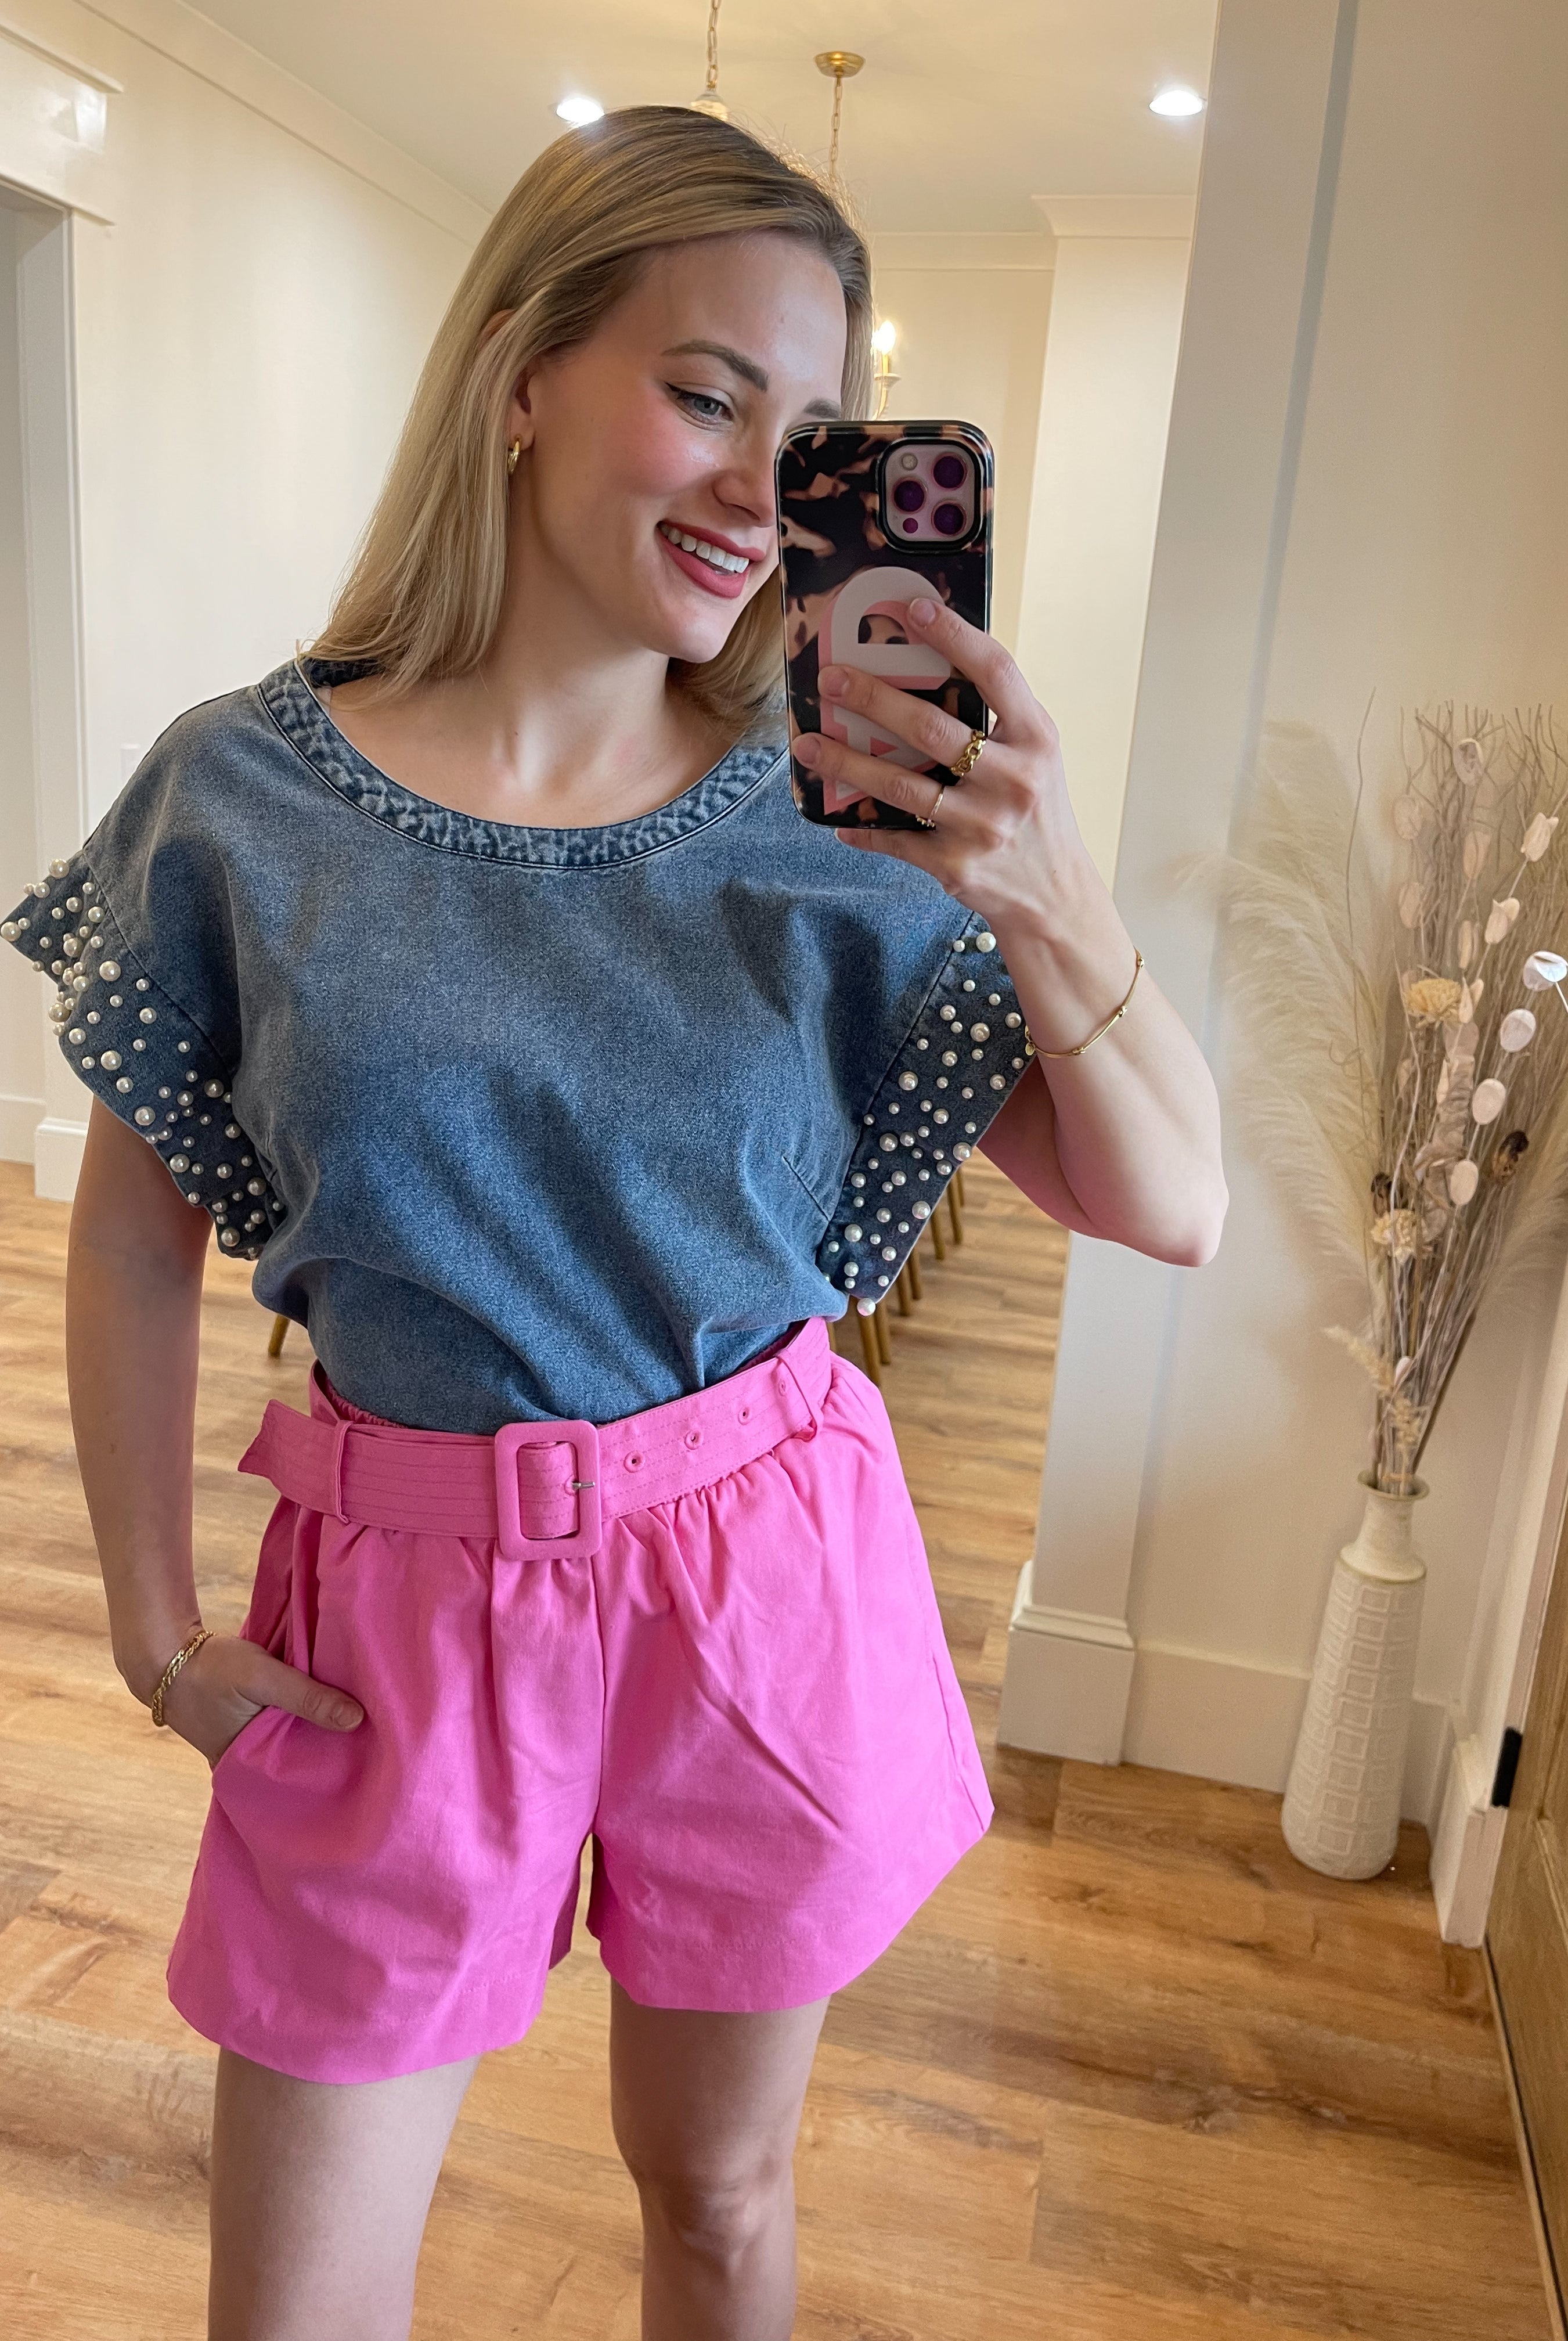 Janice Denim and Pearl Top - Be You Boutique